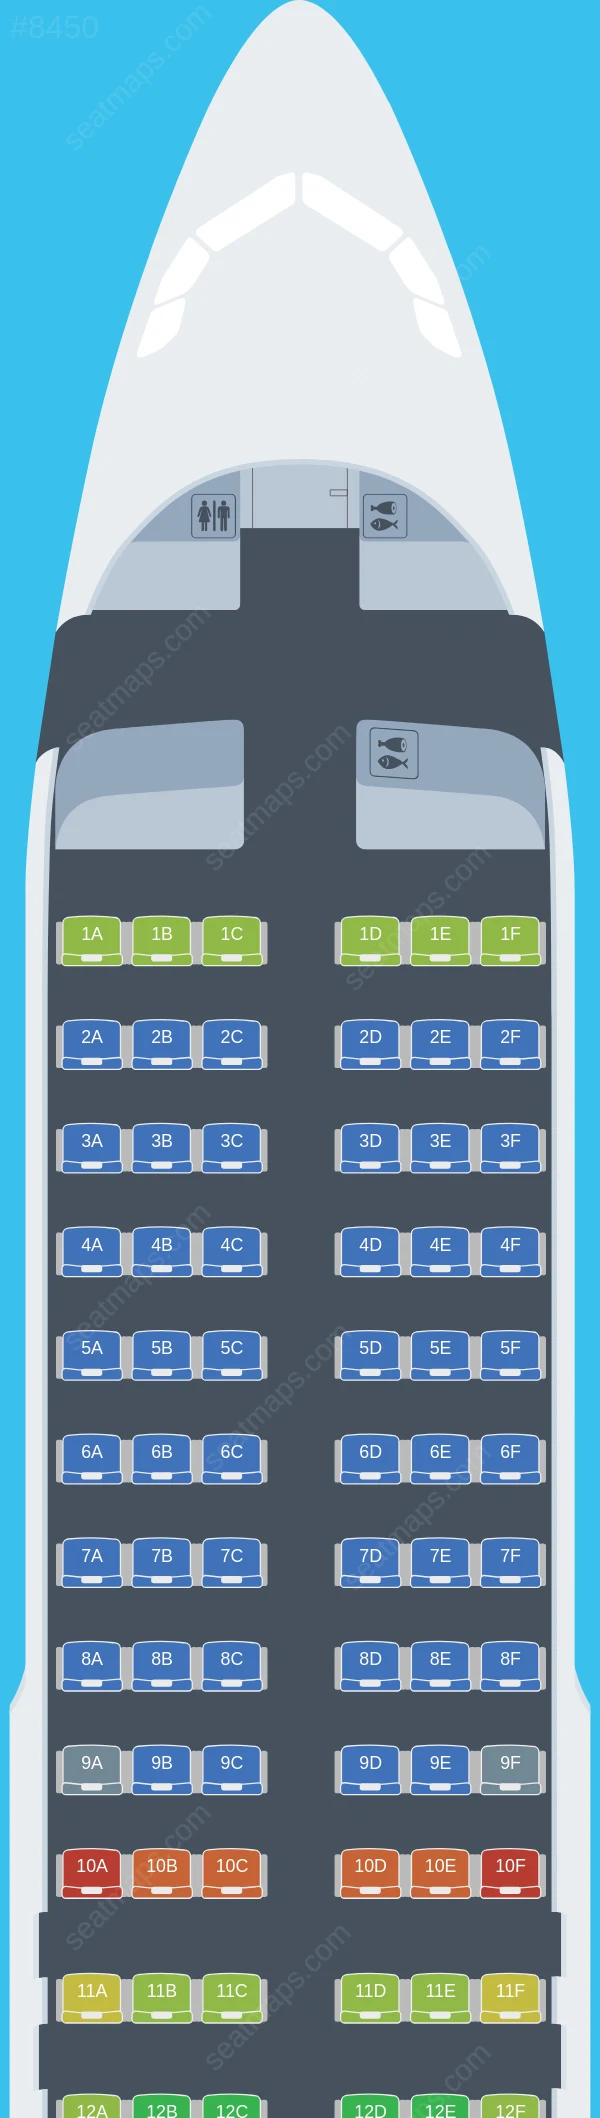 British Airways Airbus A320neo aircraft seat map A320neo